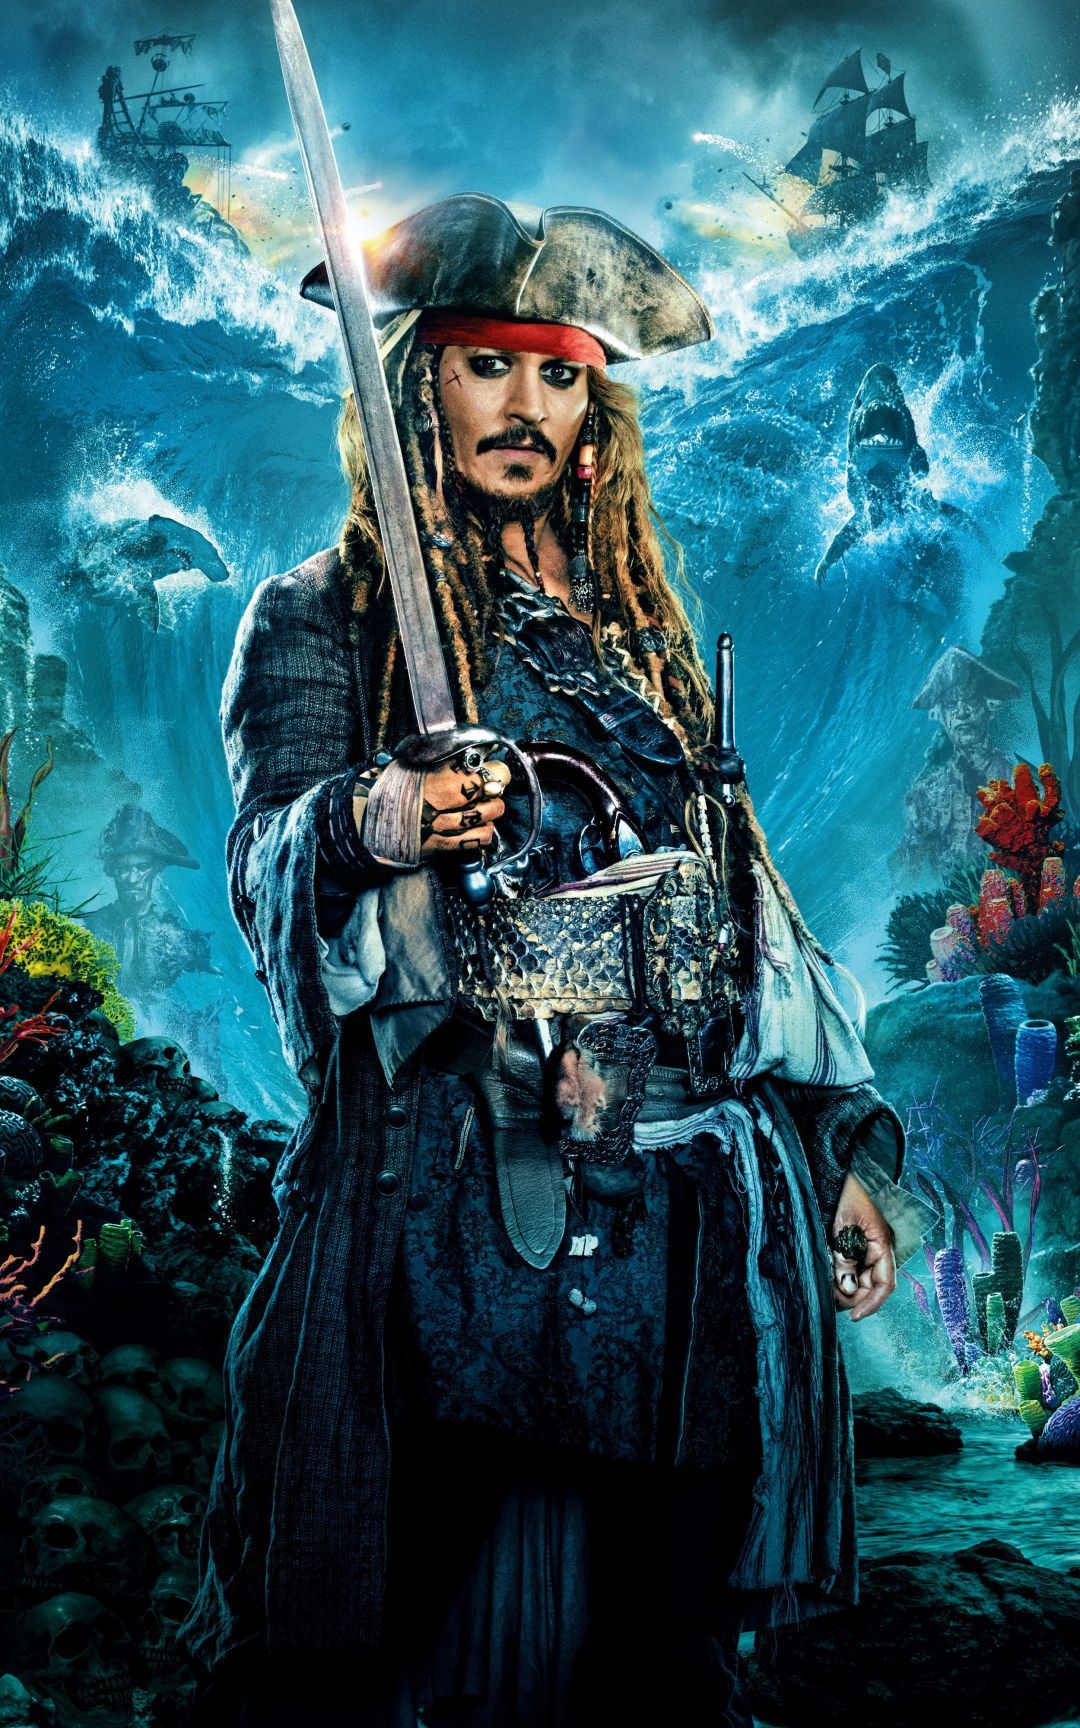 for iphone download Pirates of the Caribbean free